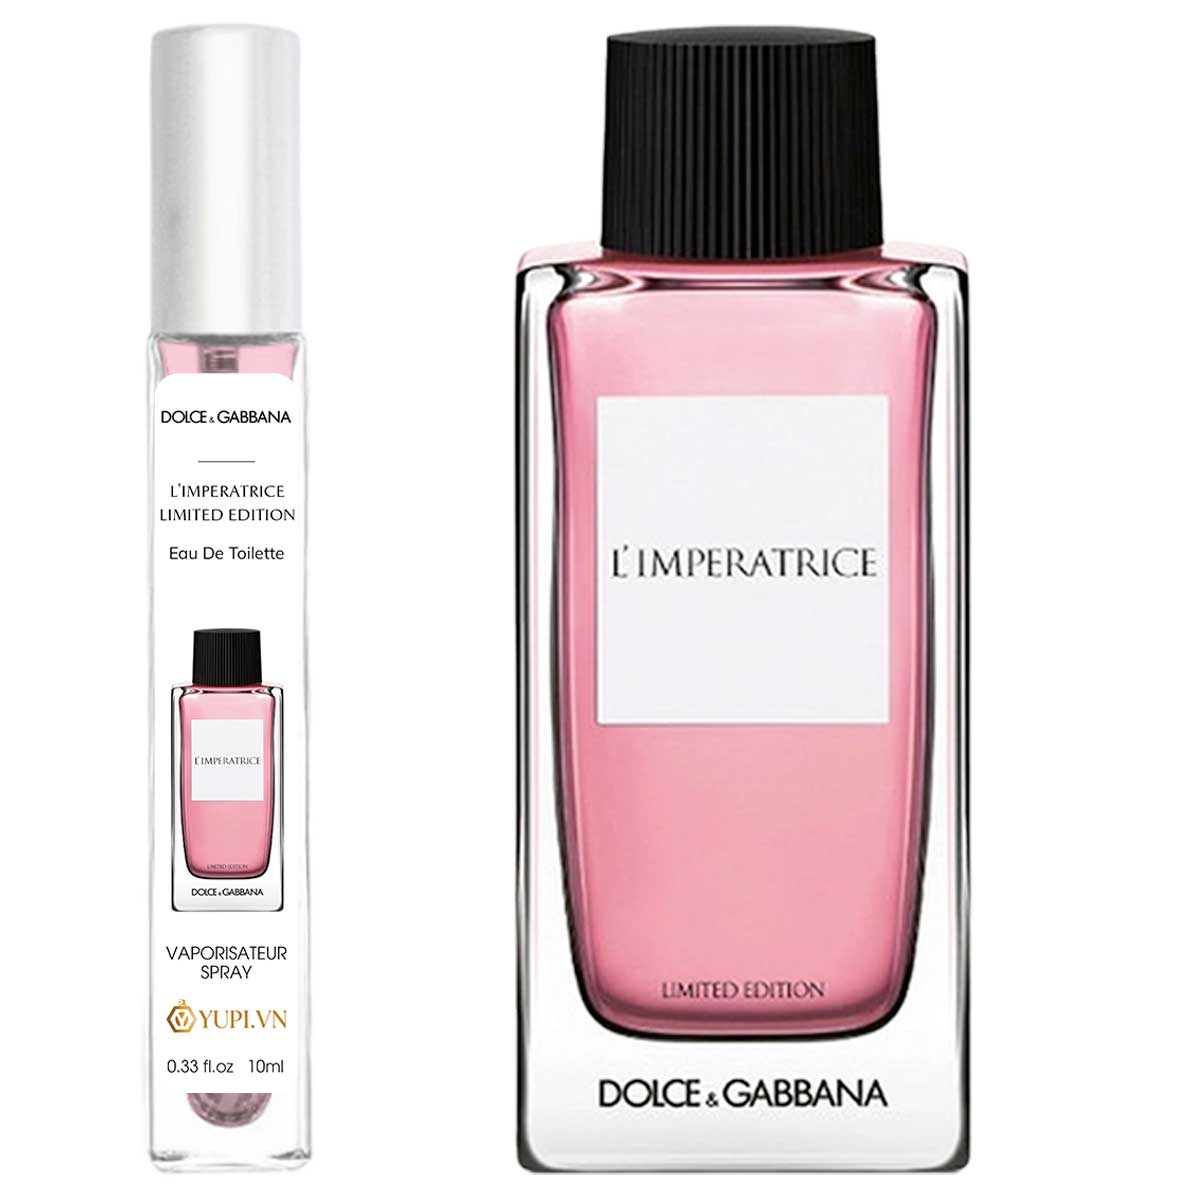 dolce gabbana limperatrice limited edition chiet 10ml